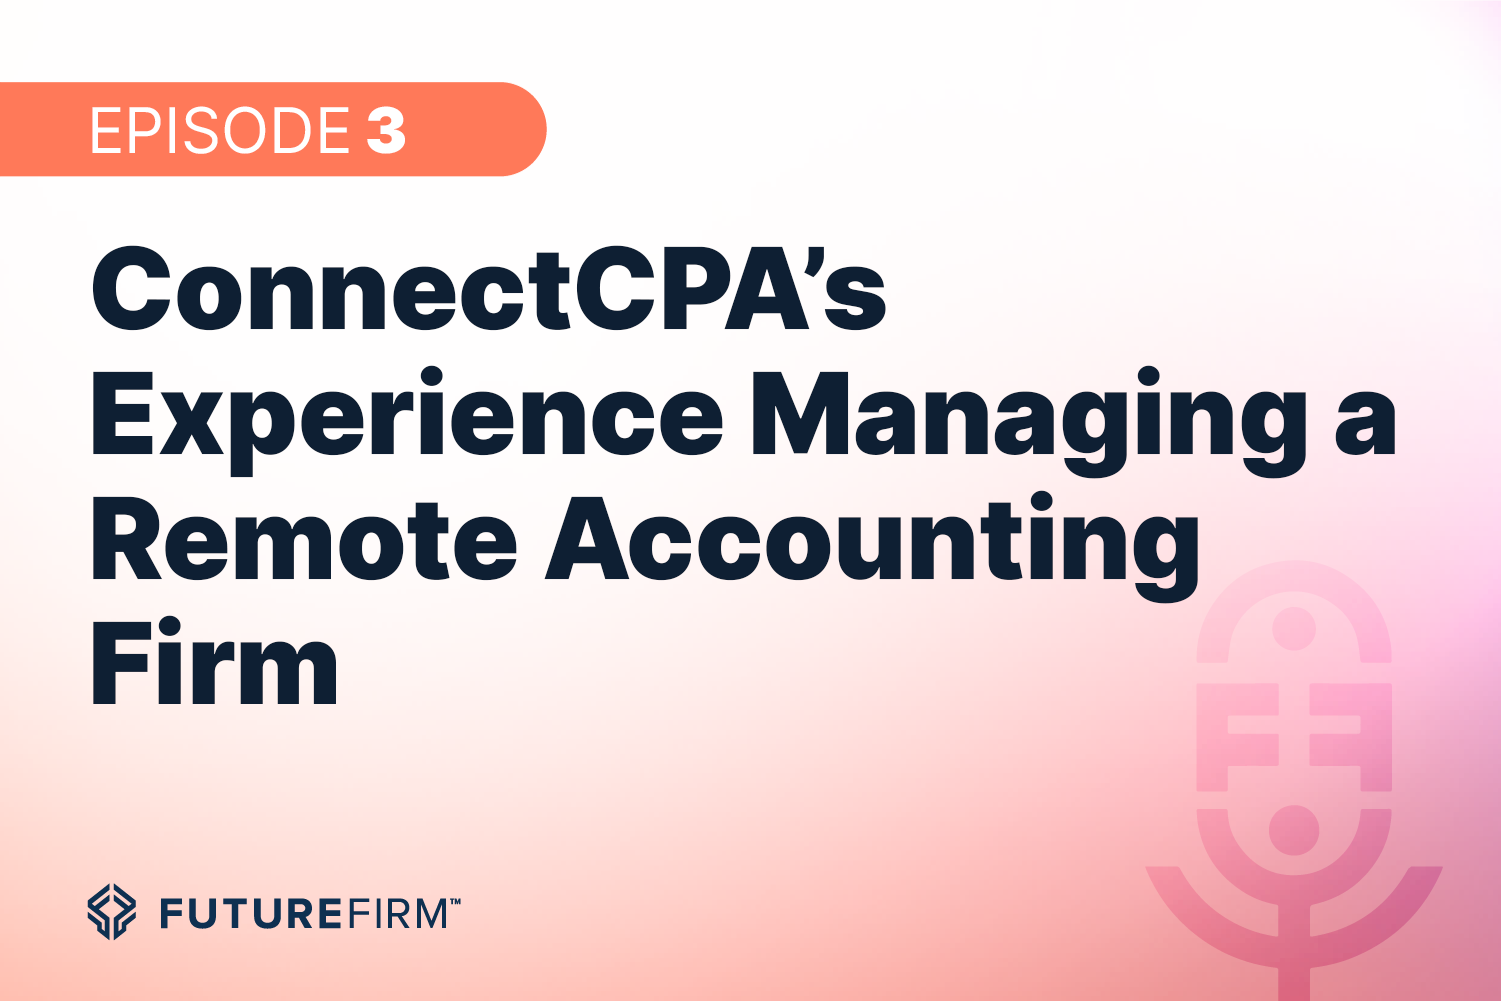 ConnectCPA’s Experience Managing a Remote Accounting Firm